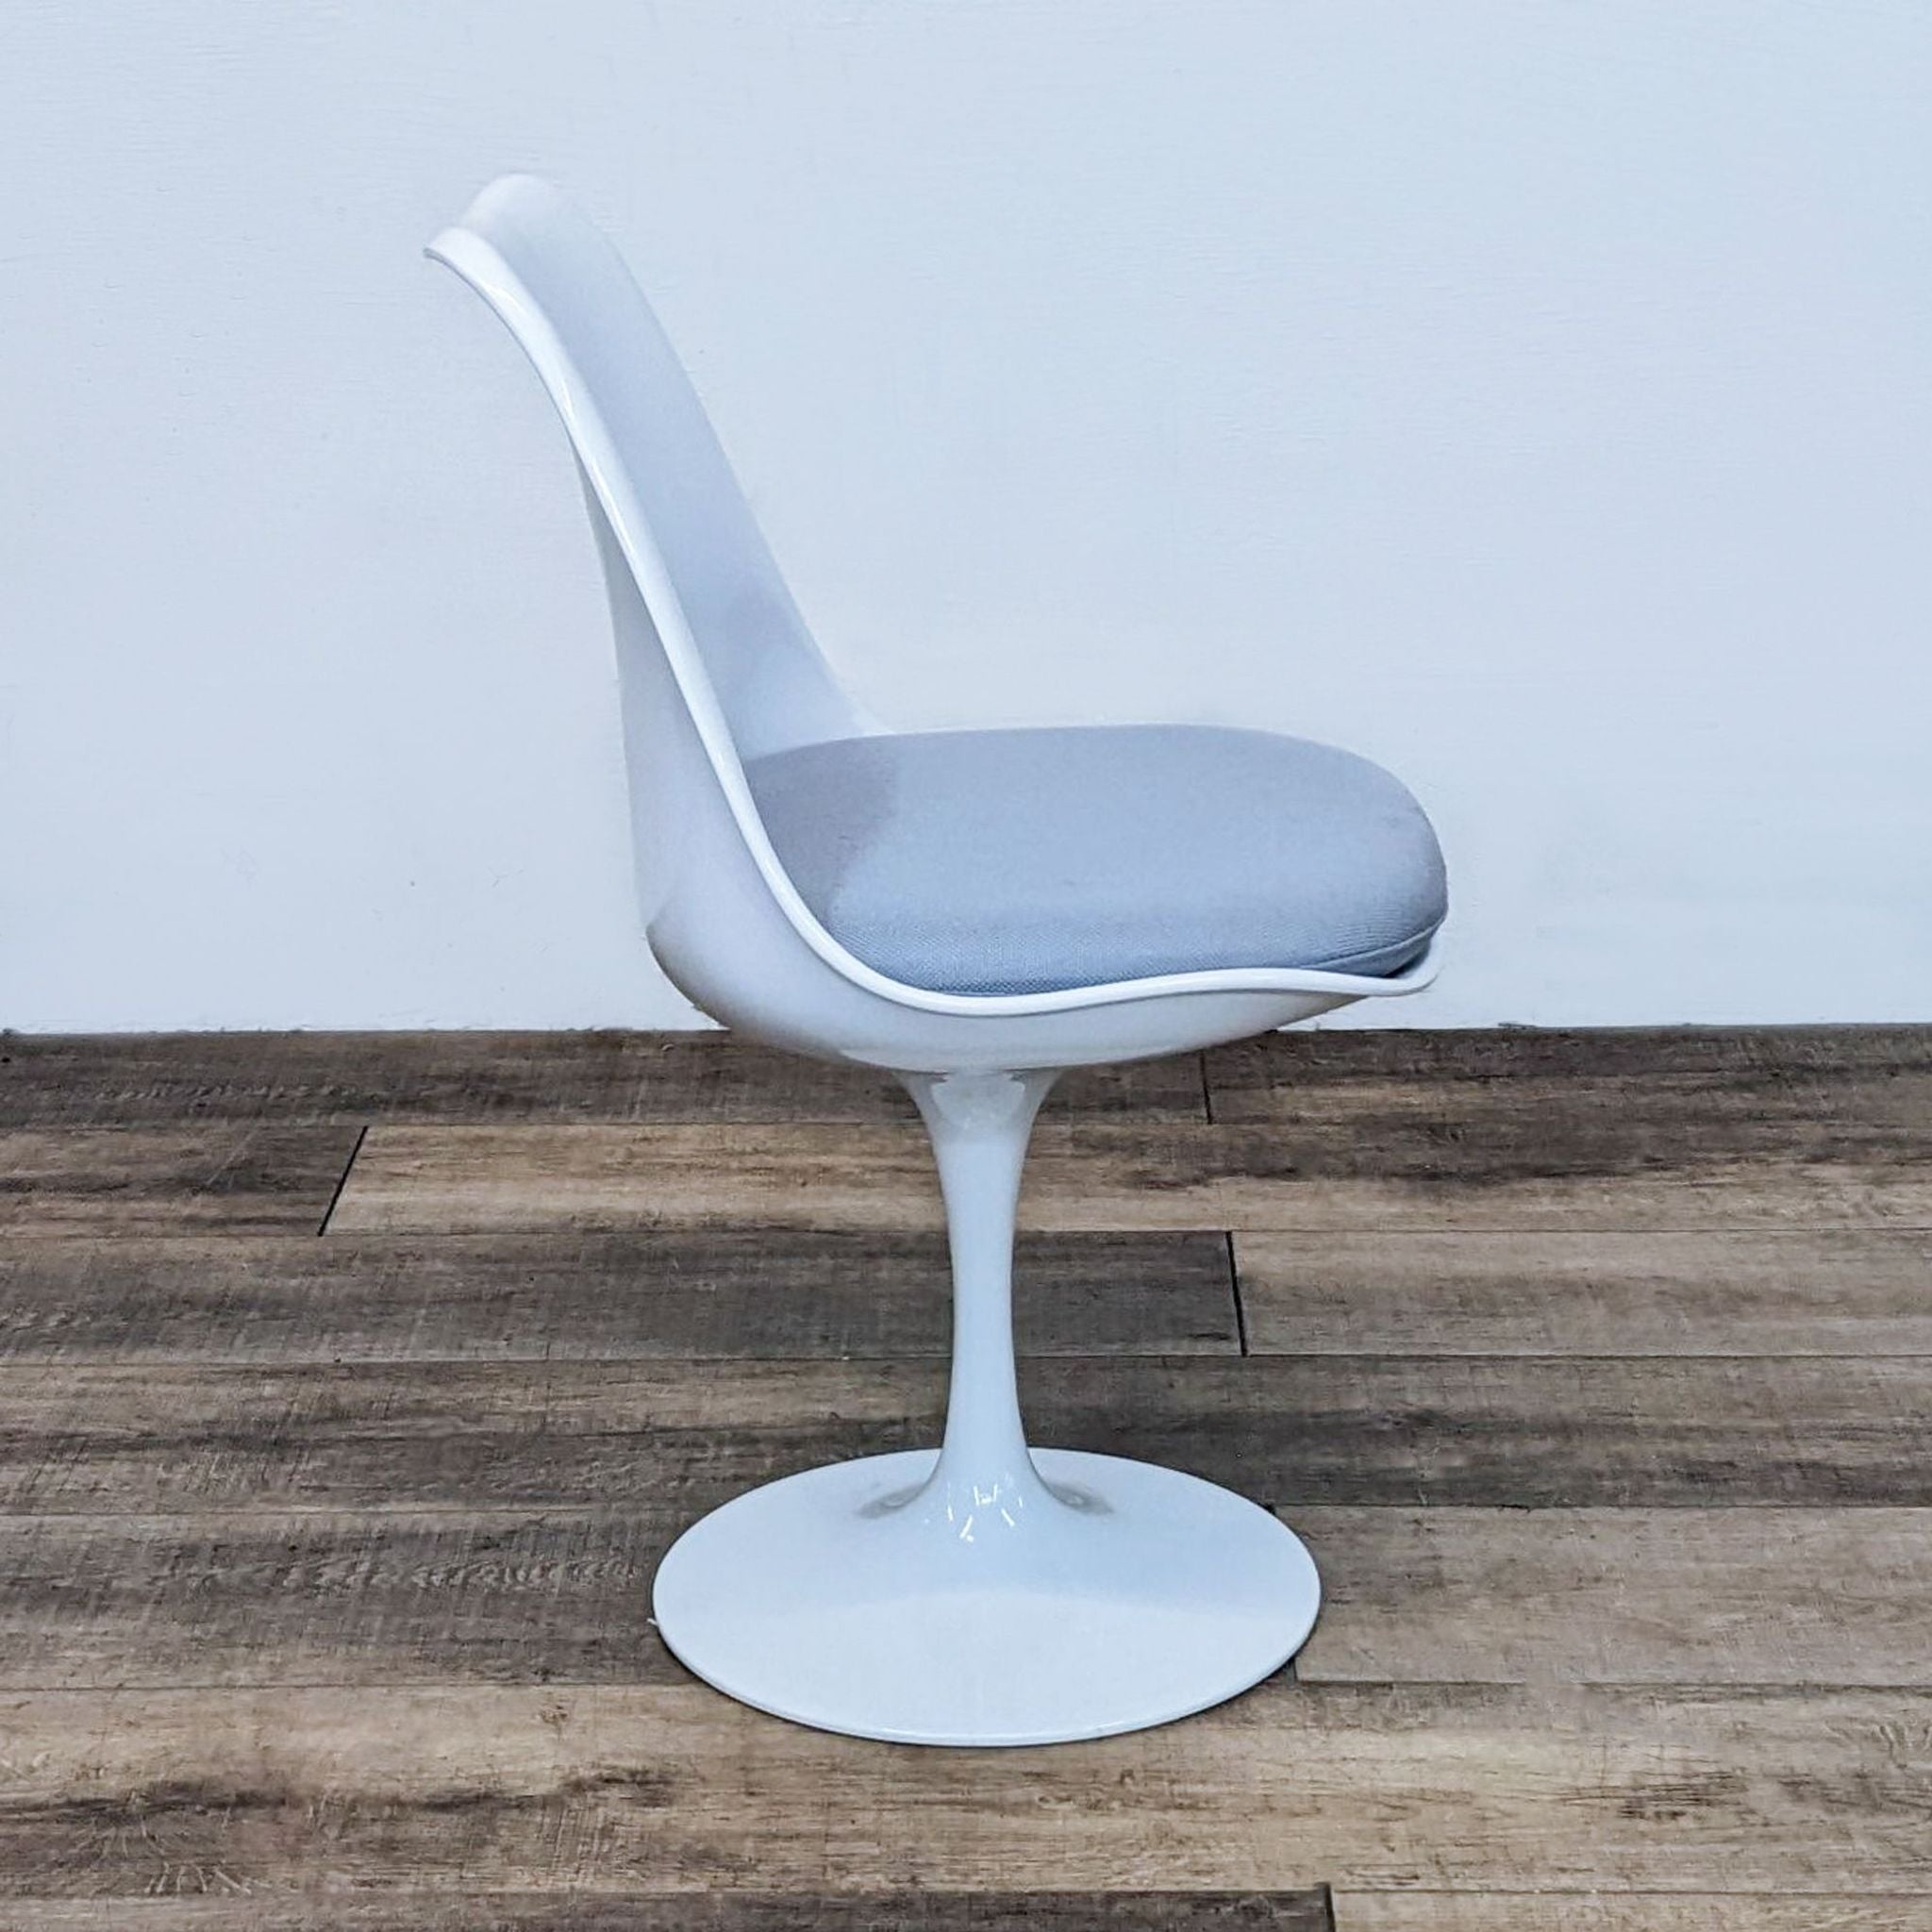 Ergonomic Lippa side chair by Modway featuring a swivel tulip style base and a removable gray seat cushion.